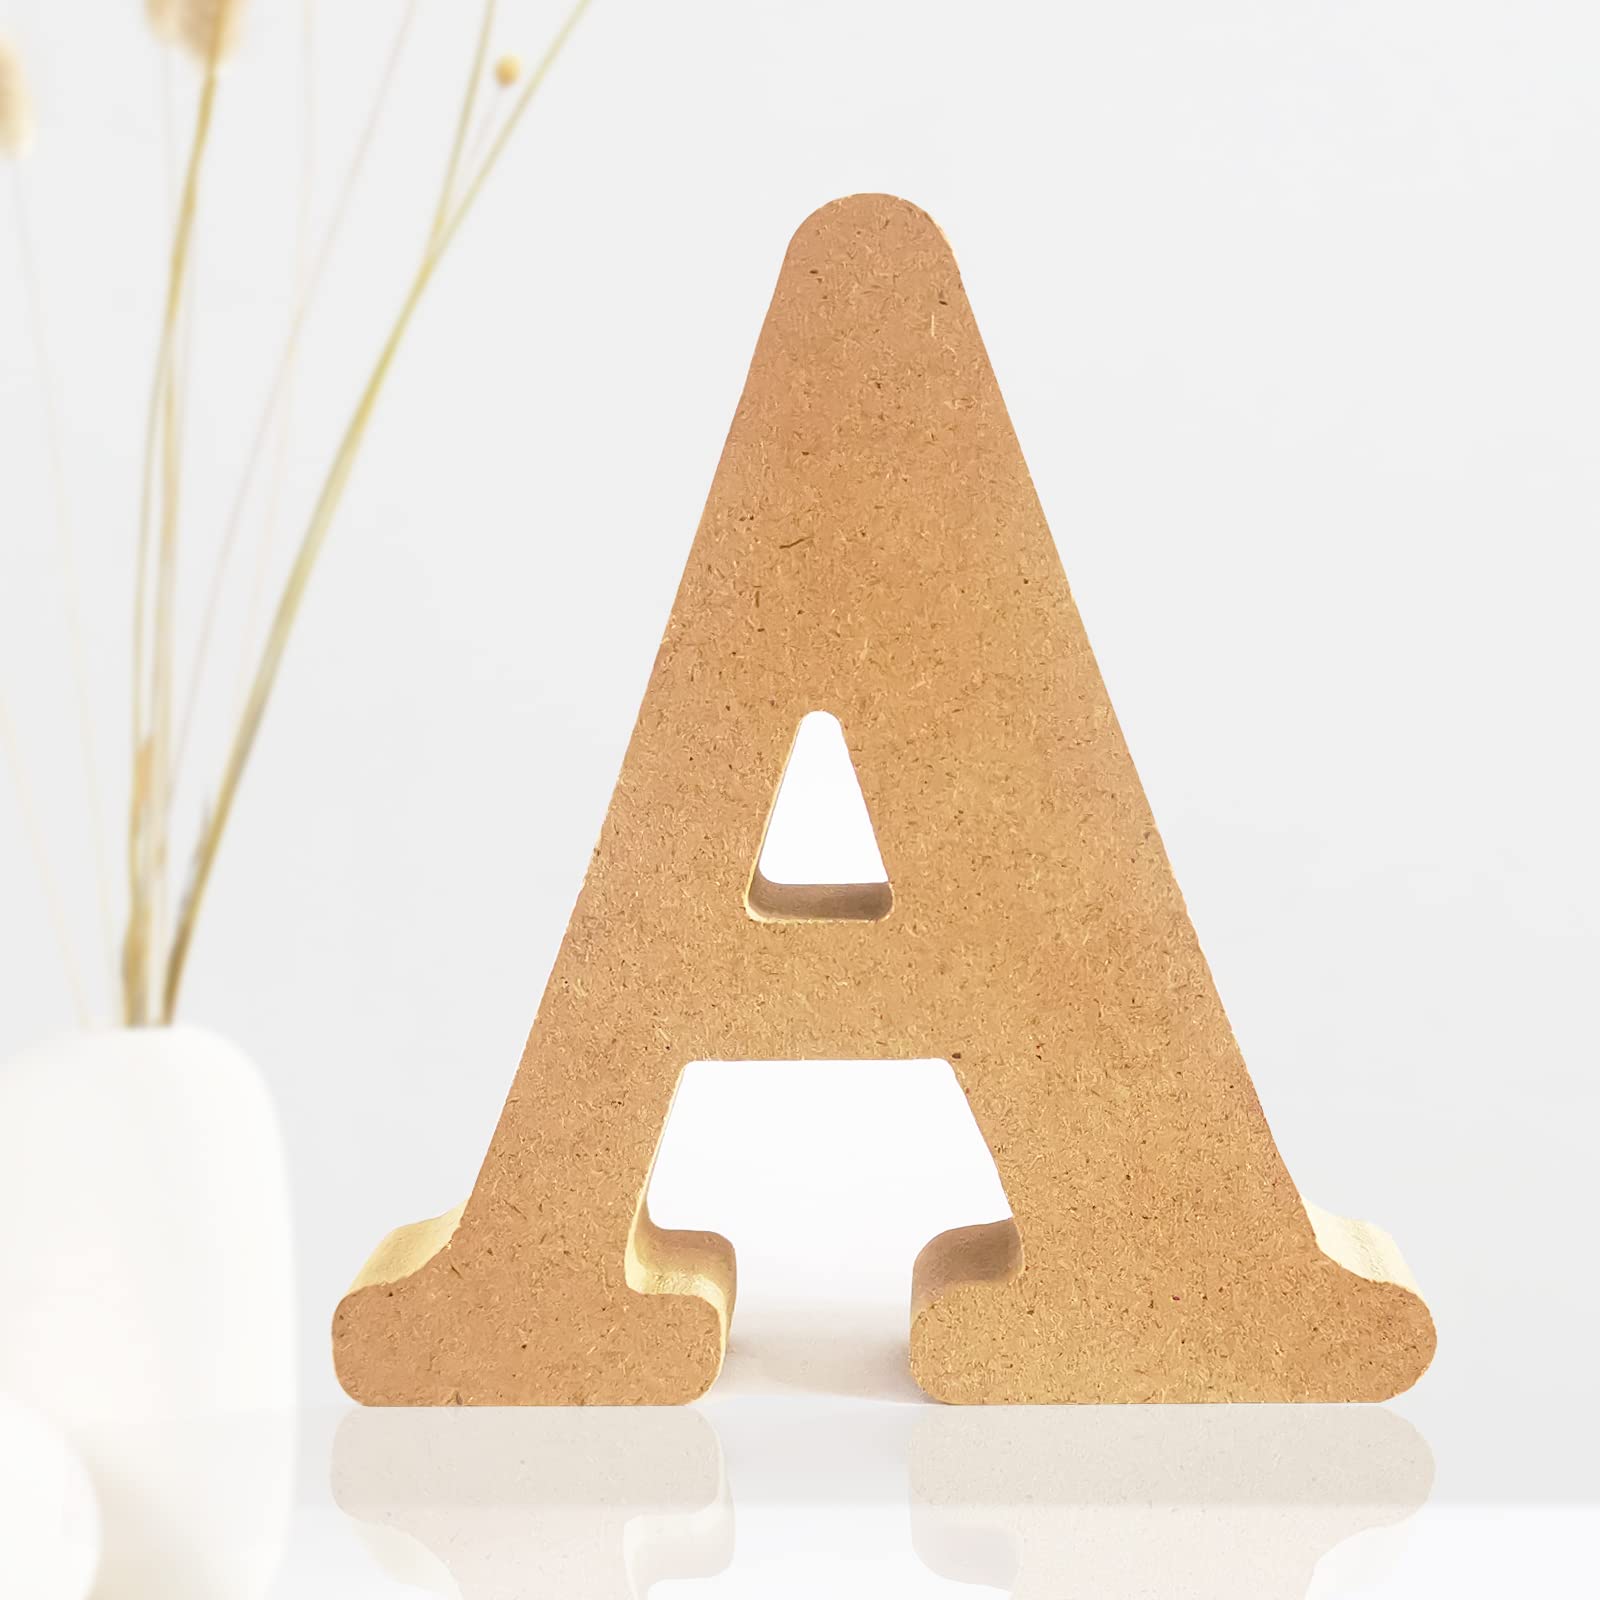 AOCEAN 4 Inch White Wood Letters Unfinished Wood Letters for Wall Decor  Decorative Standing Letters Slices Sign Board Decoration for Craft Home  Party